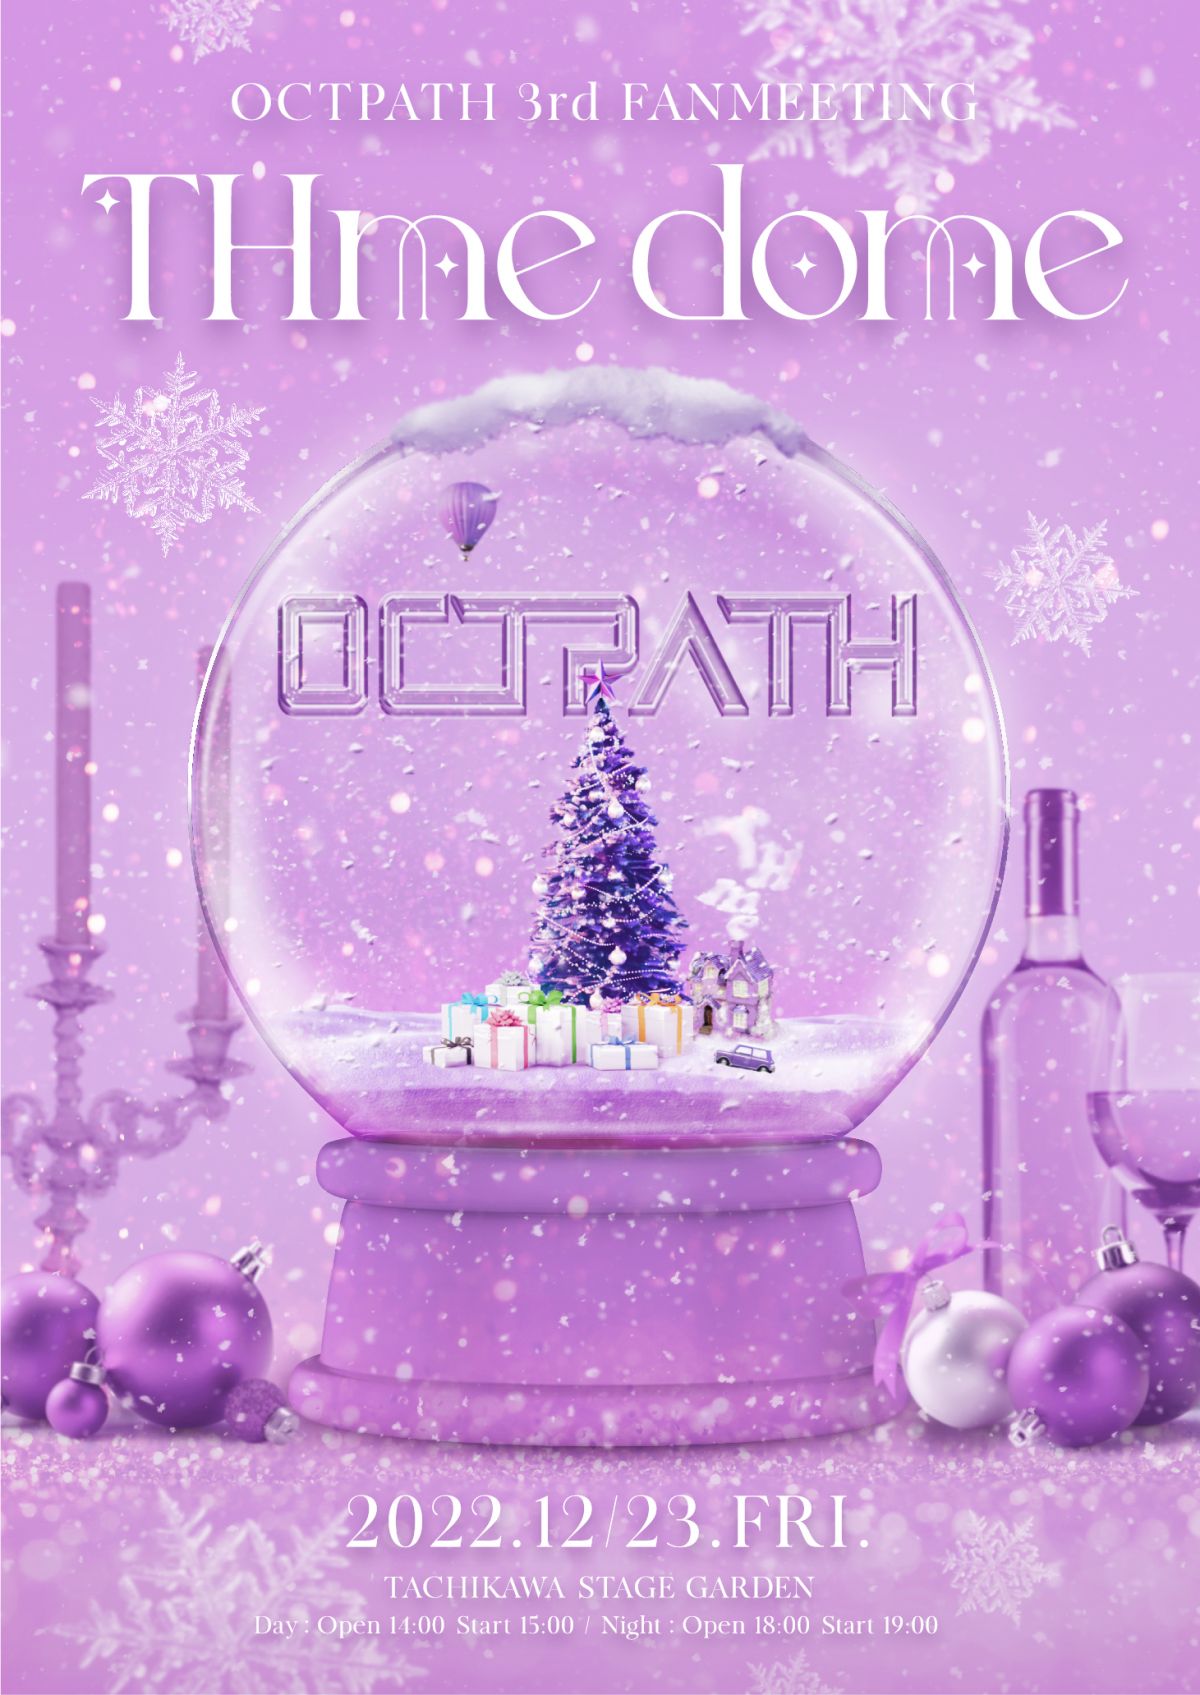 「OCTPATH 3rd FANMEETING THme dome」開催決定＆FC会員先行チケット受付開始！